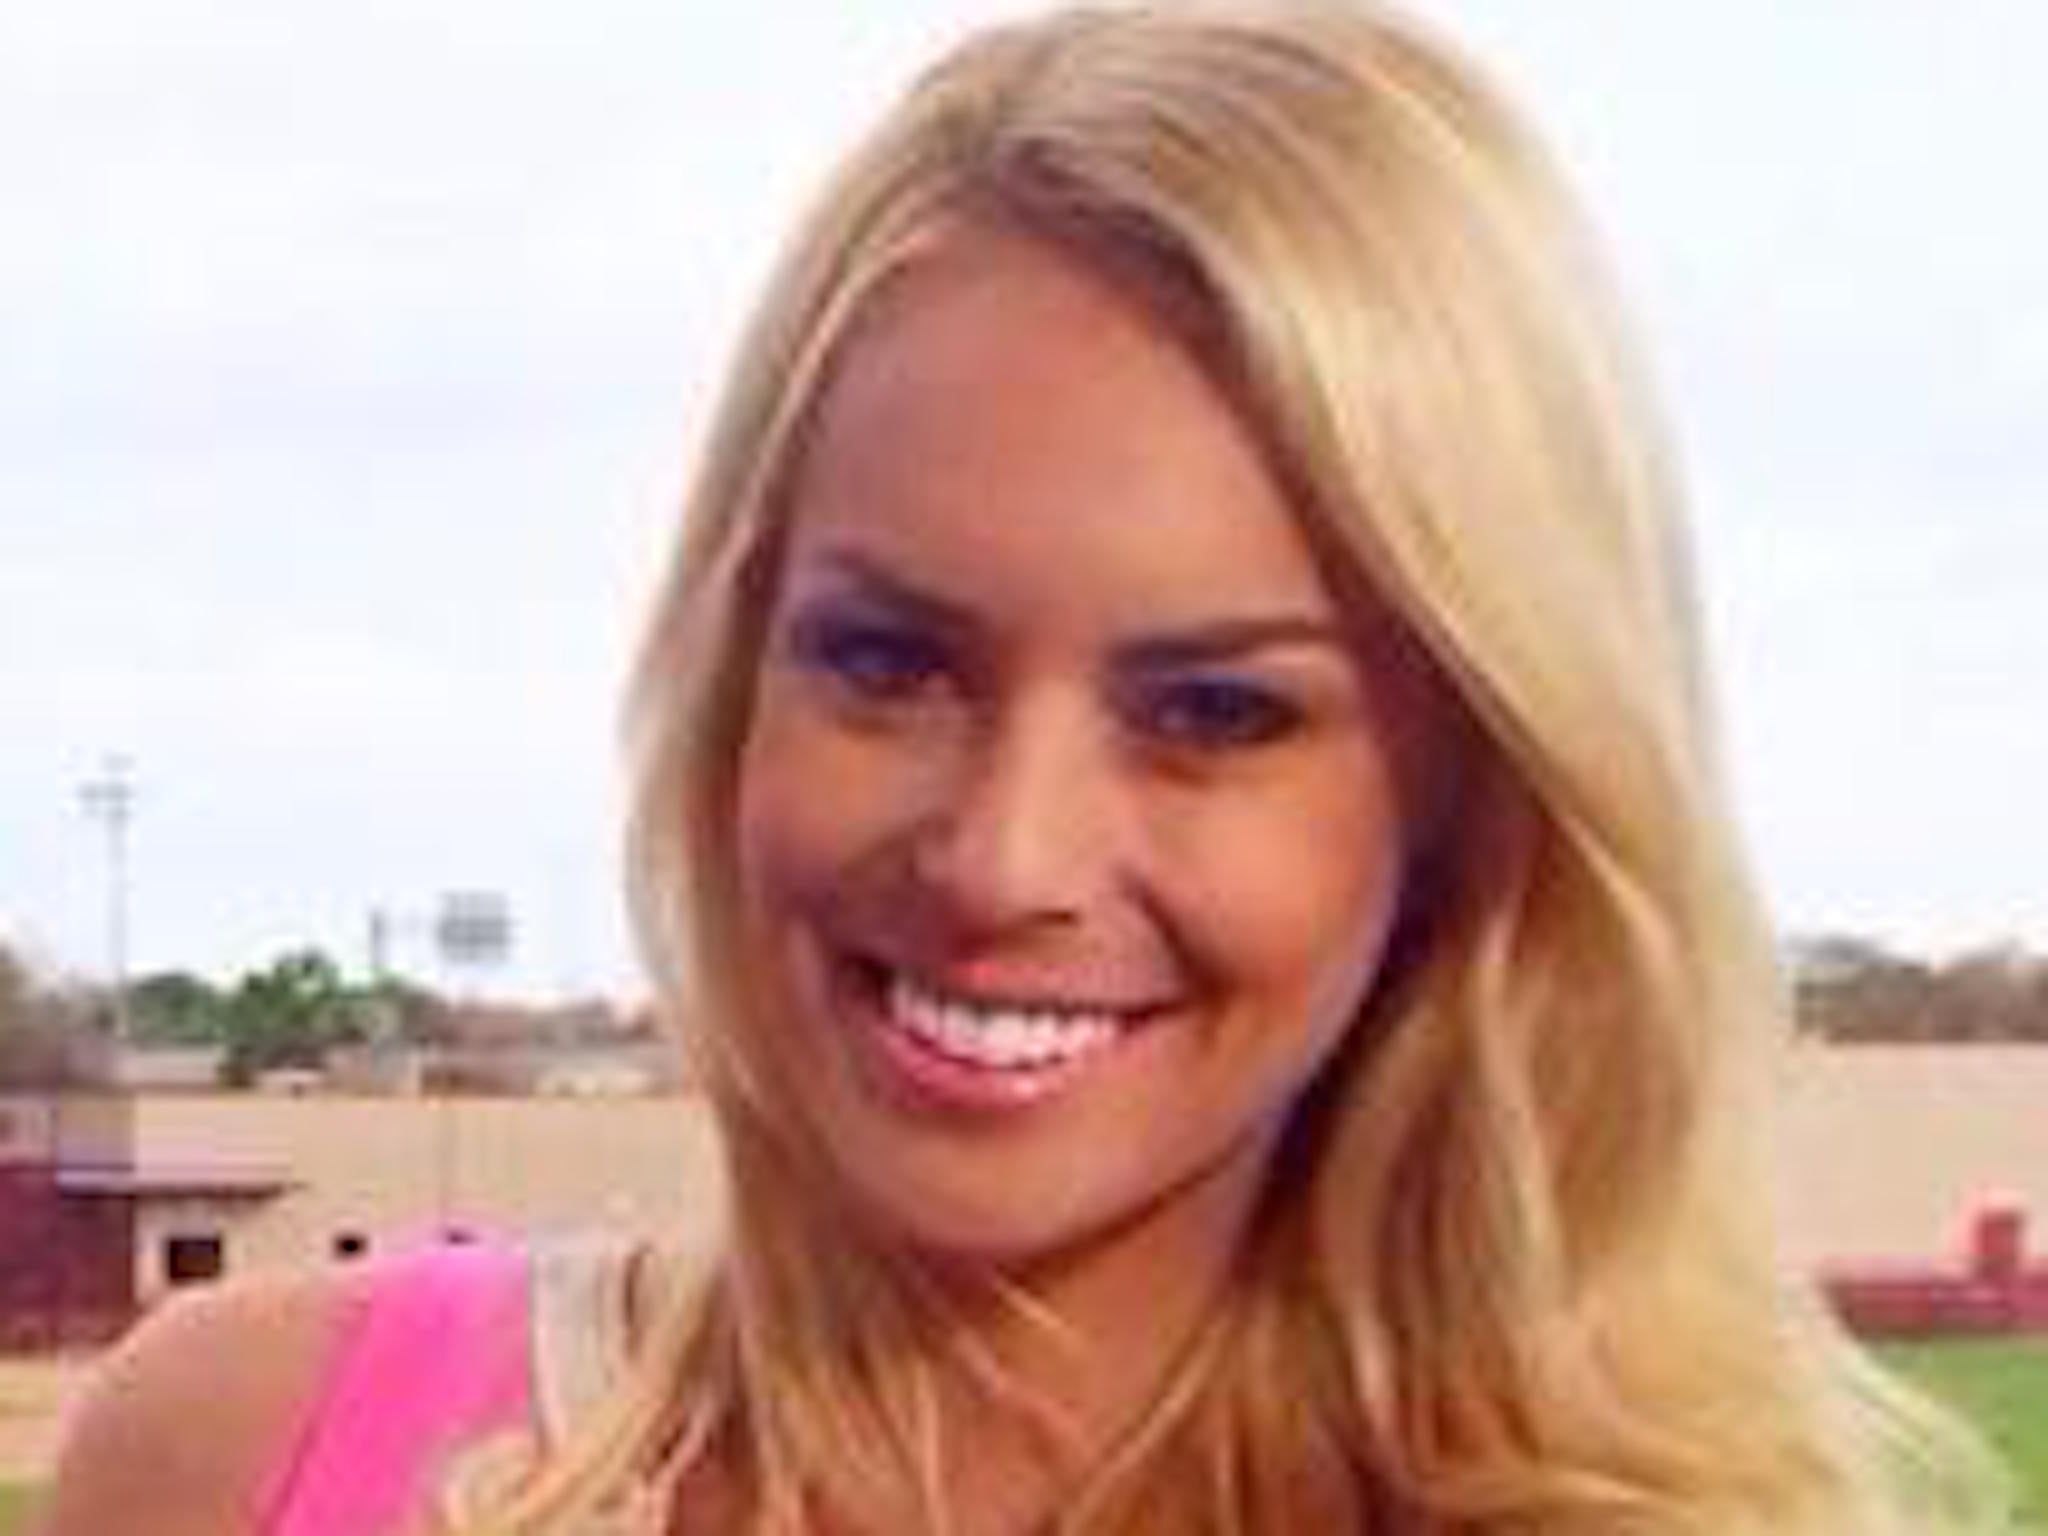 Britt Mchenry Video Captures Espn Sports Reporter Berating Car Towing Firm Employee The